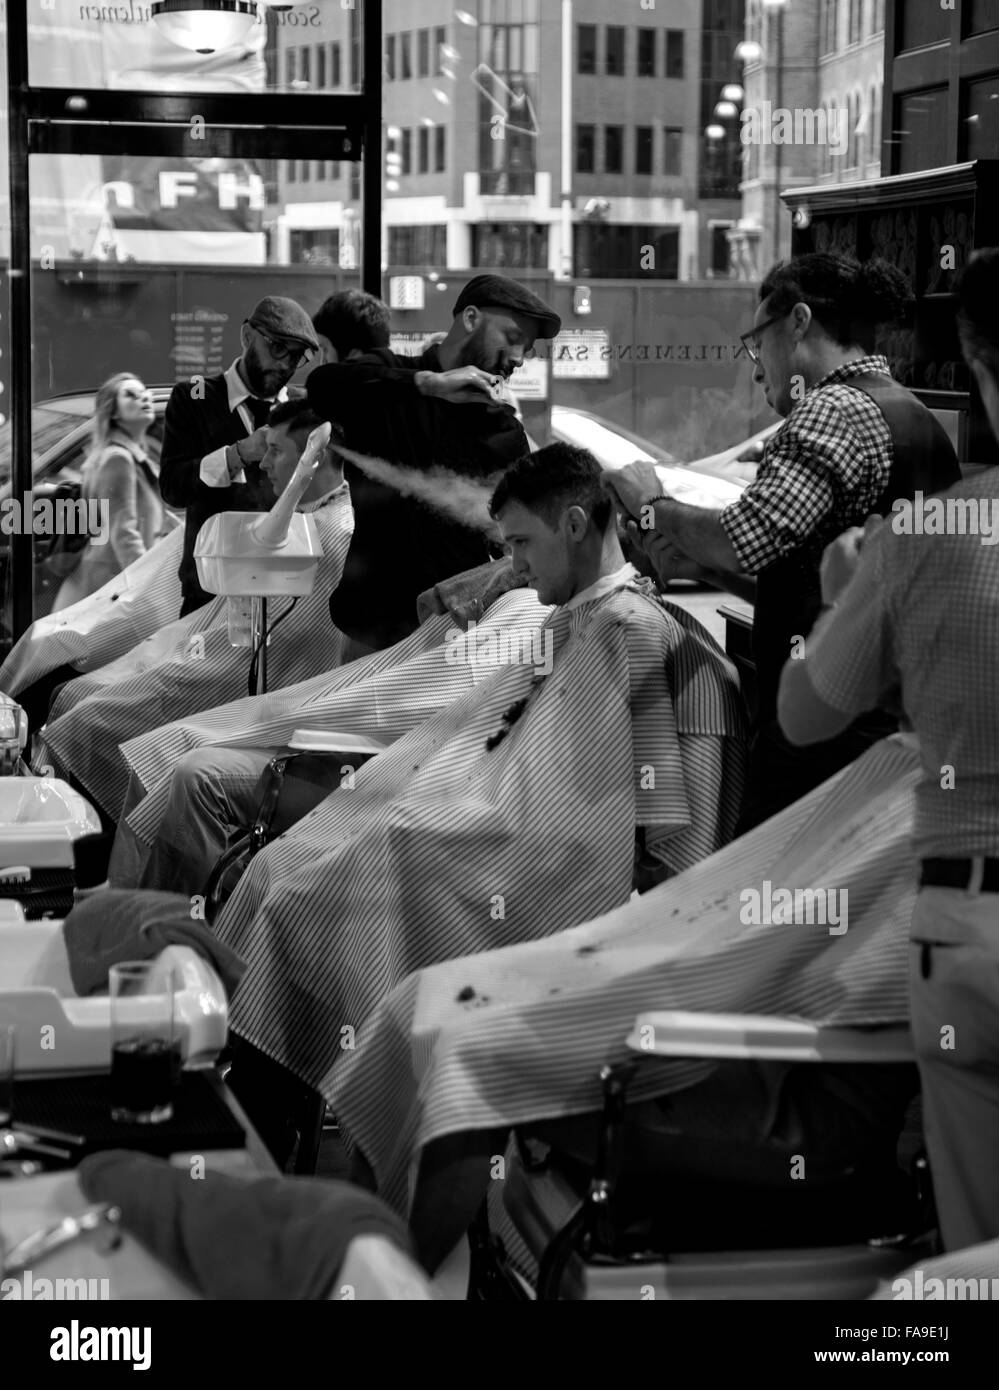 Black and white photo of busy men's barber shop Stock Photo